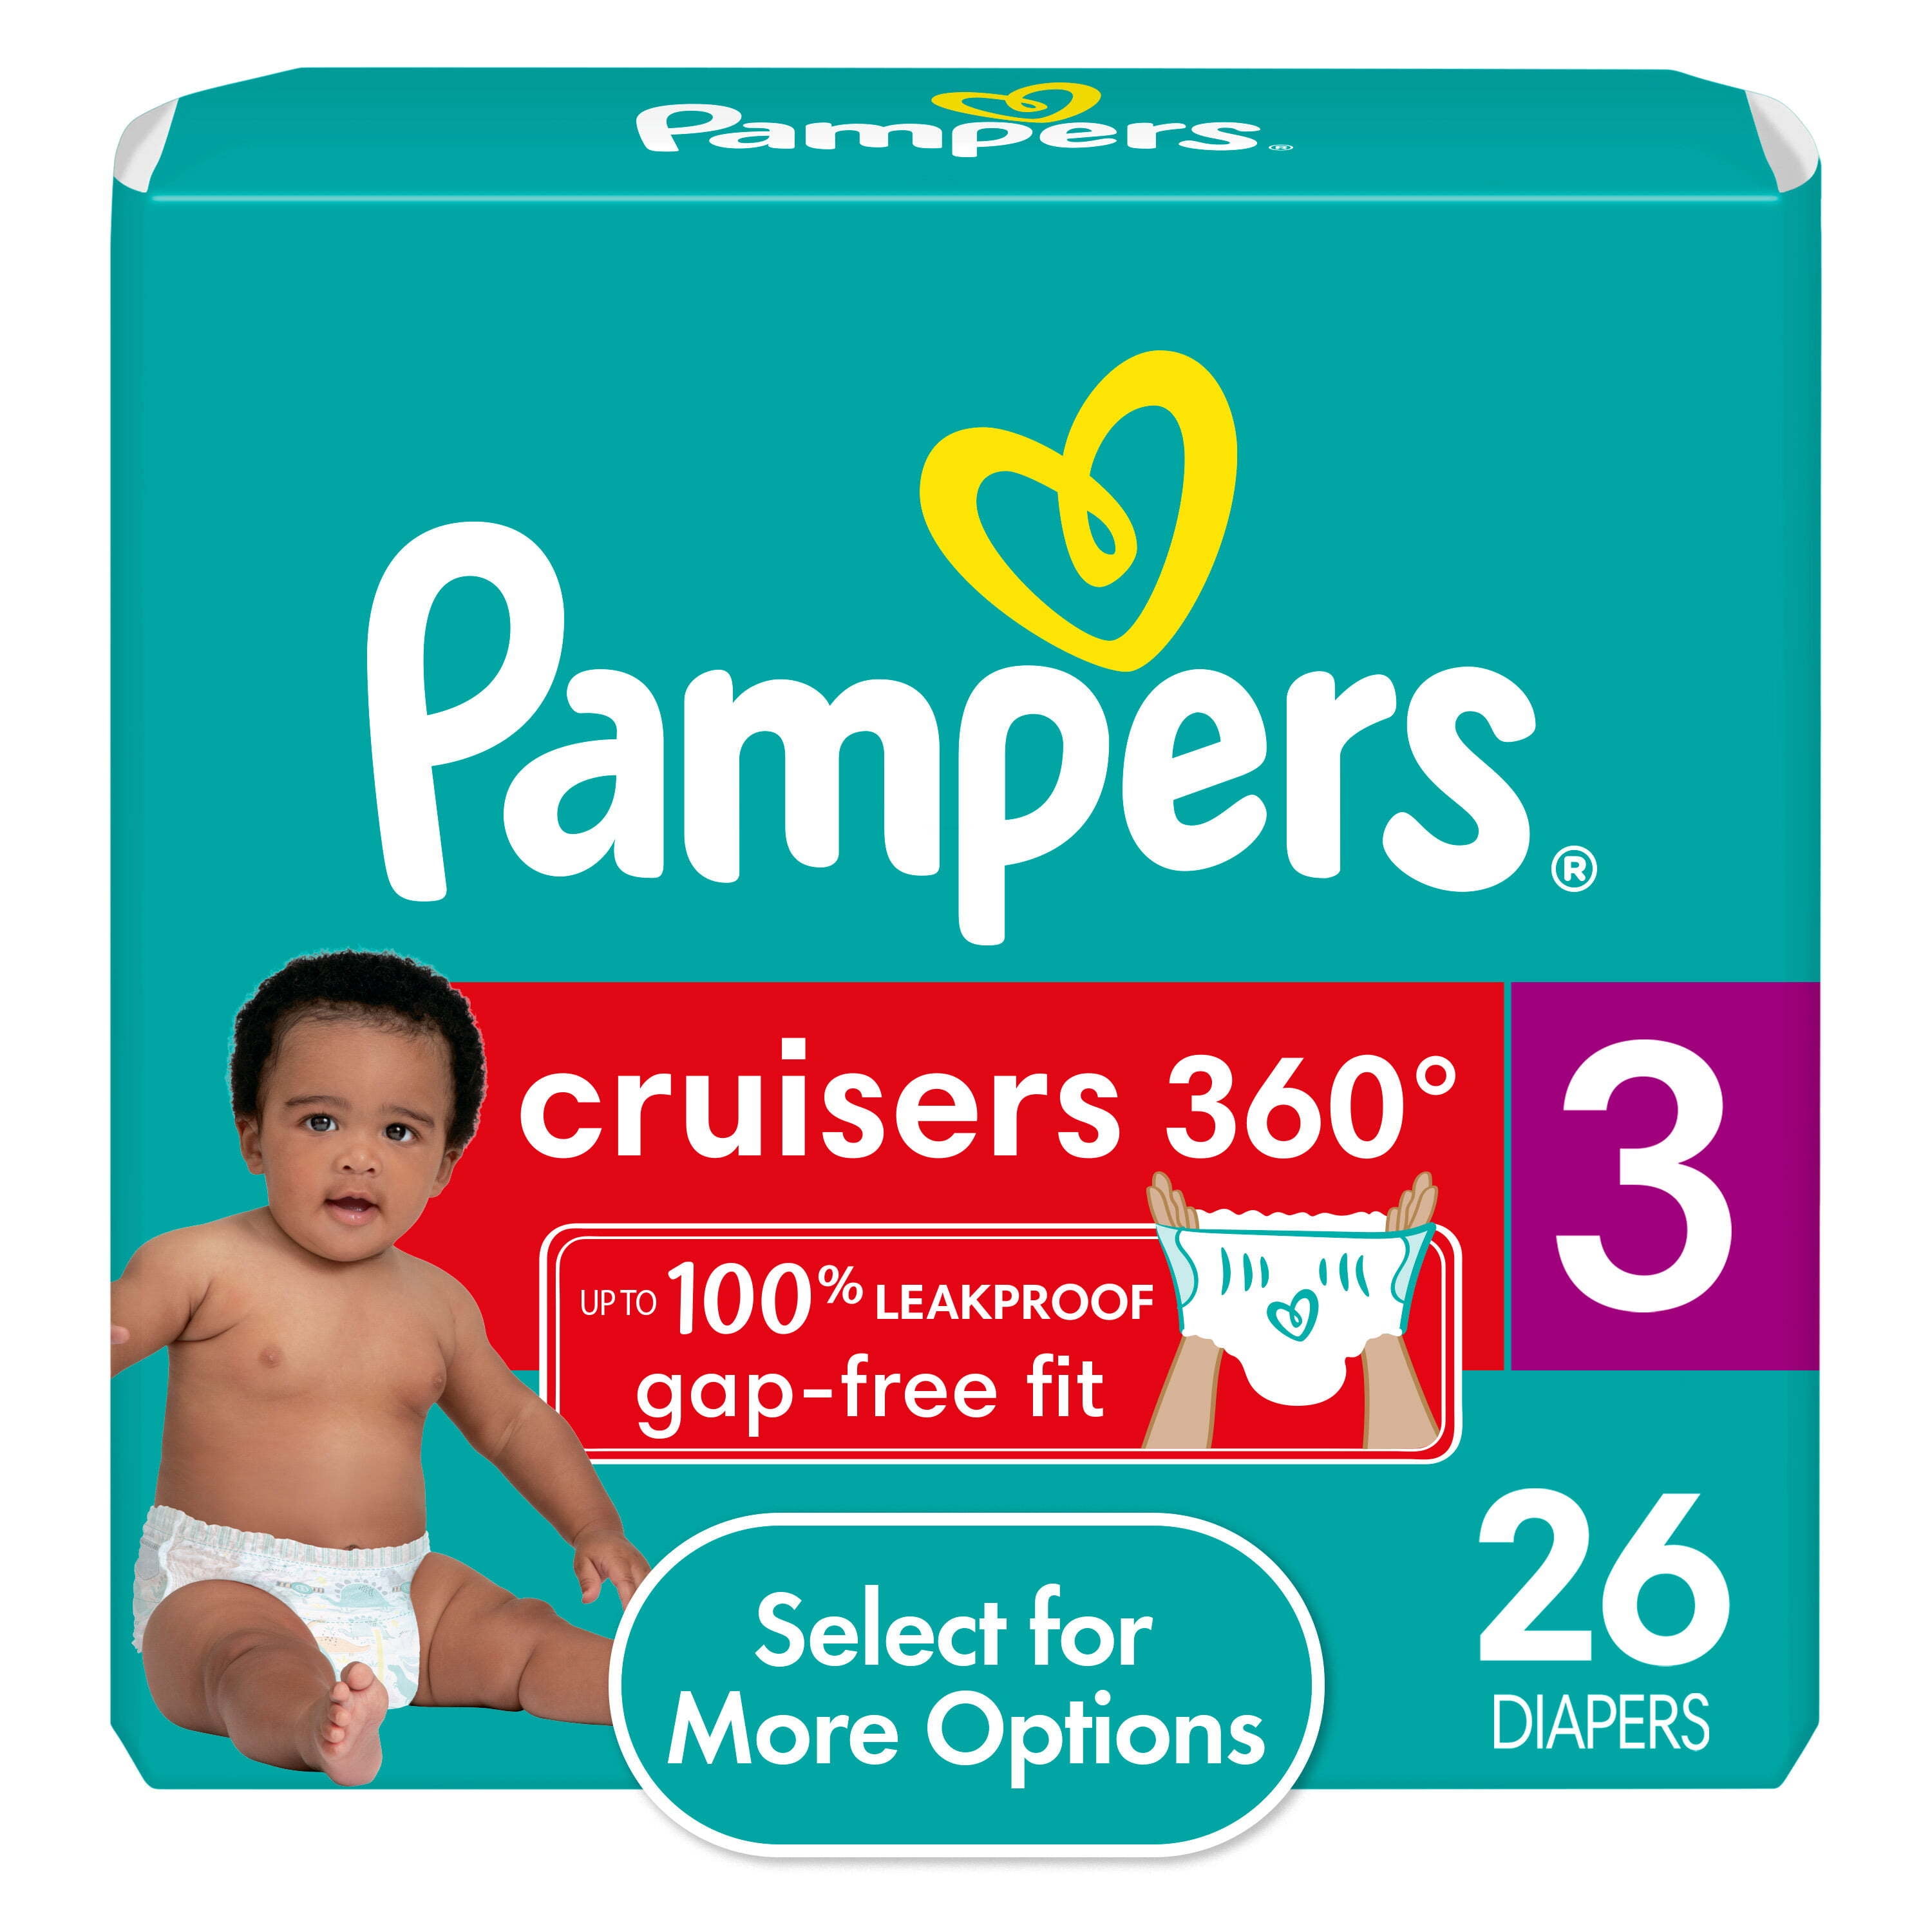 Pampers Cruisers 360 Diapers Size 3, 26 Count (Select for More Options) 